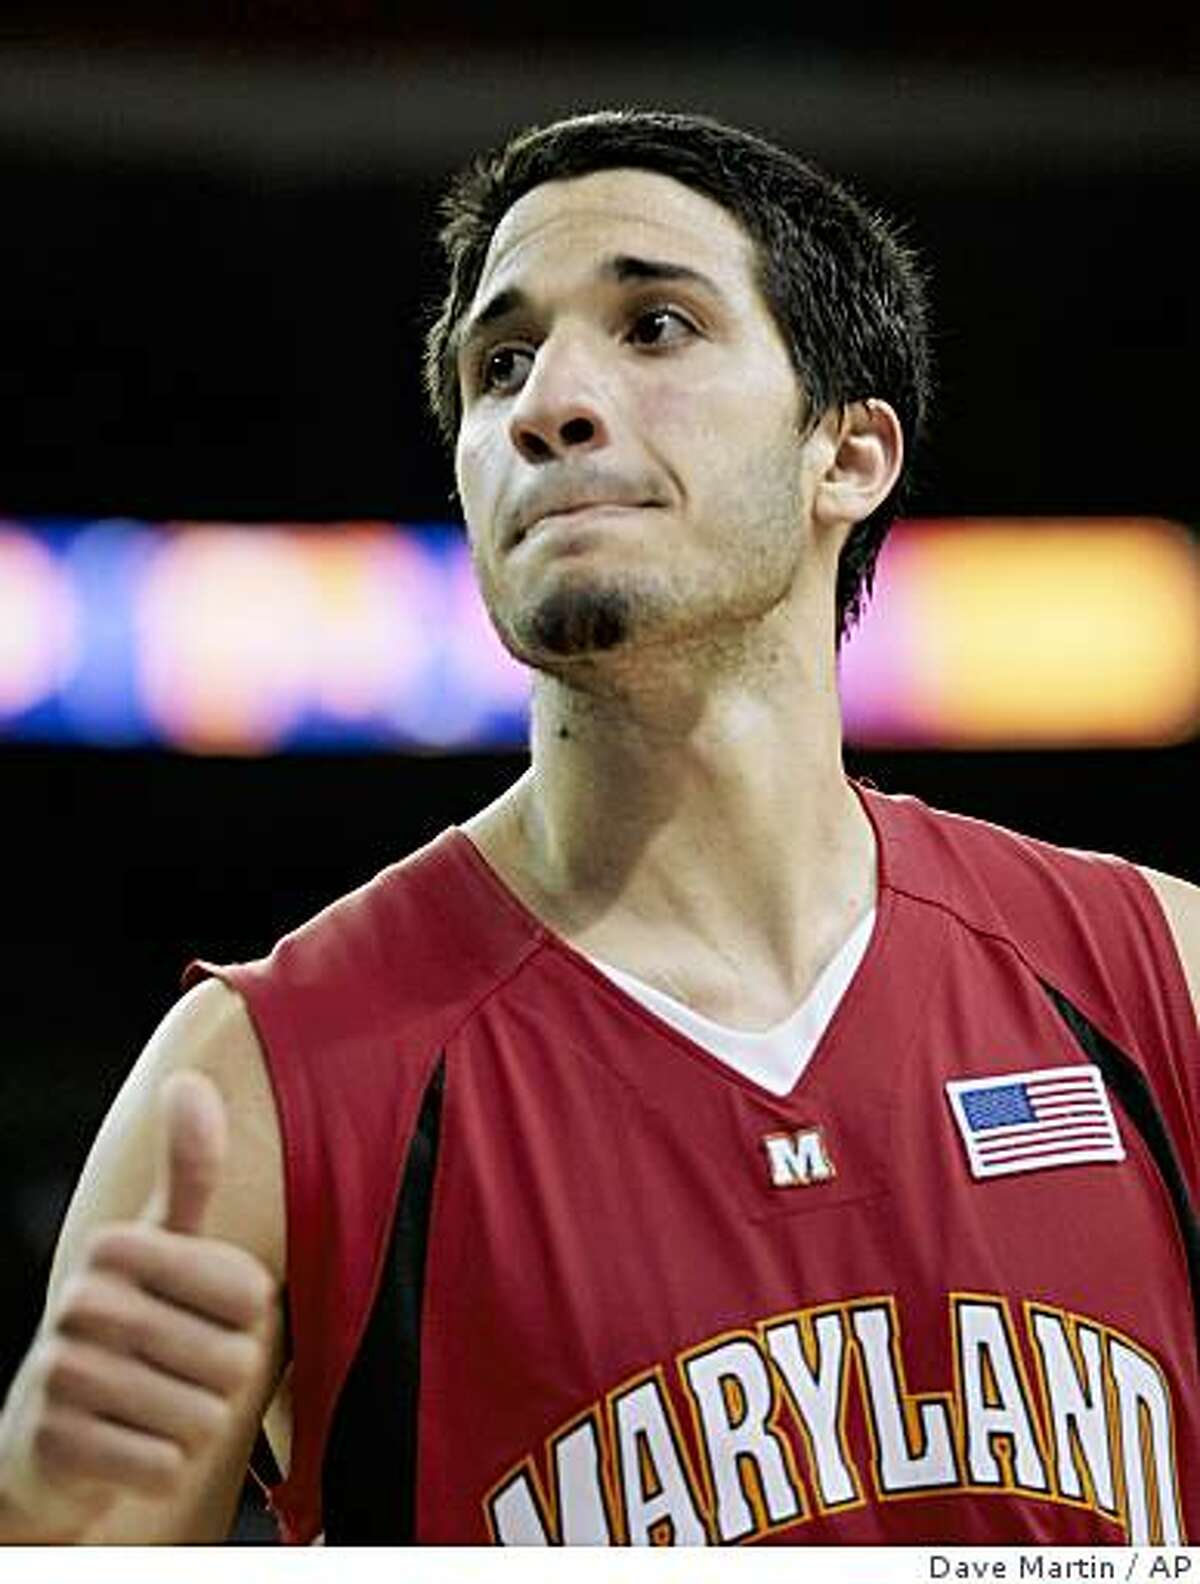 ** RETRANSMIT WITH CORRECT SLUG ** Maryland guard Greivis Vasquez walks off the court after losing 67-61 to Duke in an NCAA college basketball game in the semifinals of the Atlantic Coast Conference men's tournament in Atlanta, Saturday, March 14, 2009. (AP Photo/Dave Martin)